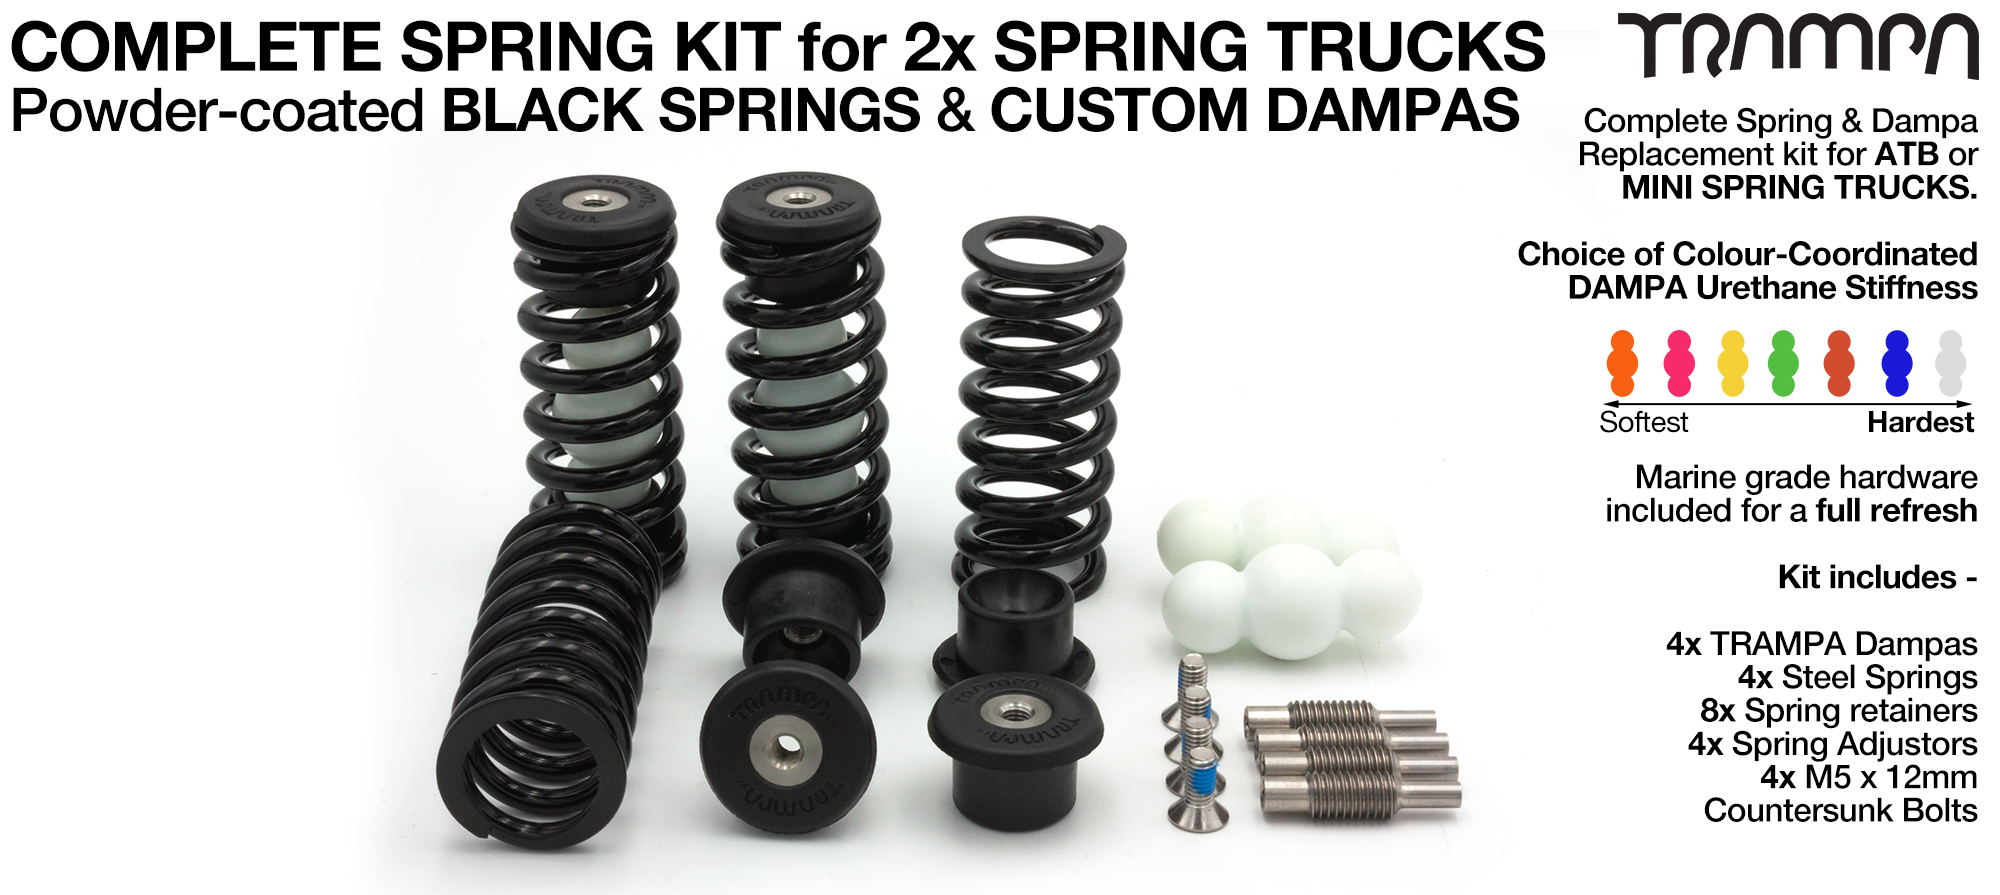 Complete Spring kit for 1x Board = 4x BLACK Springs 4x Dampa 8x Spring Retainers 4x Spring Adjuster & 4 M5x12mm Countersunk Bolt